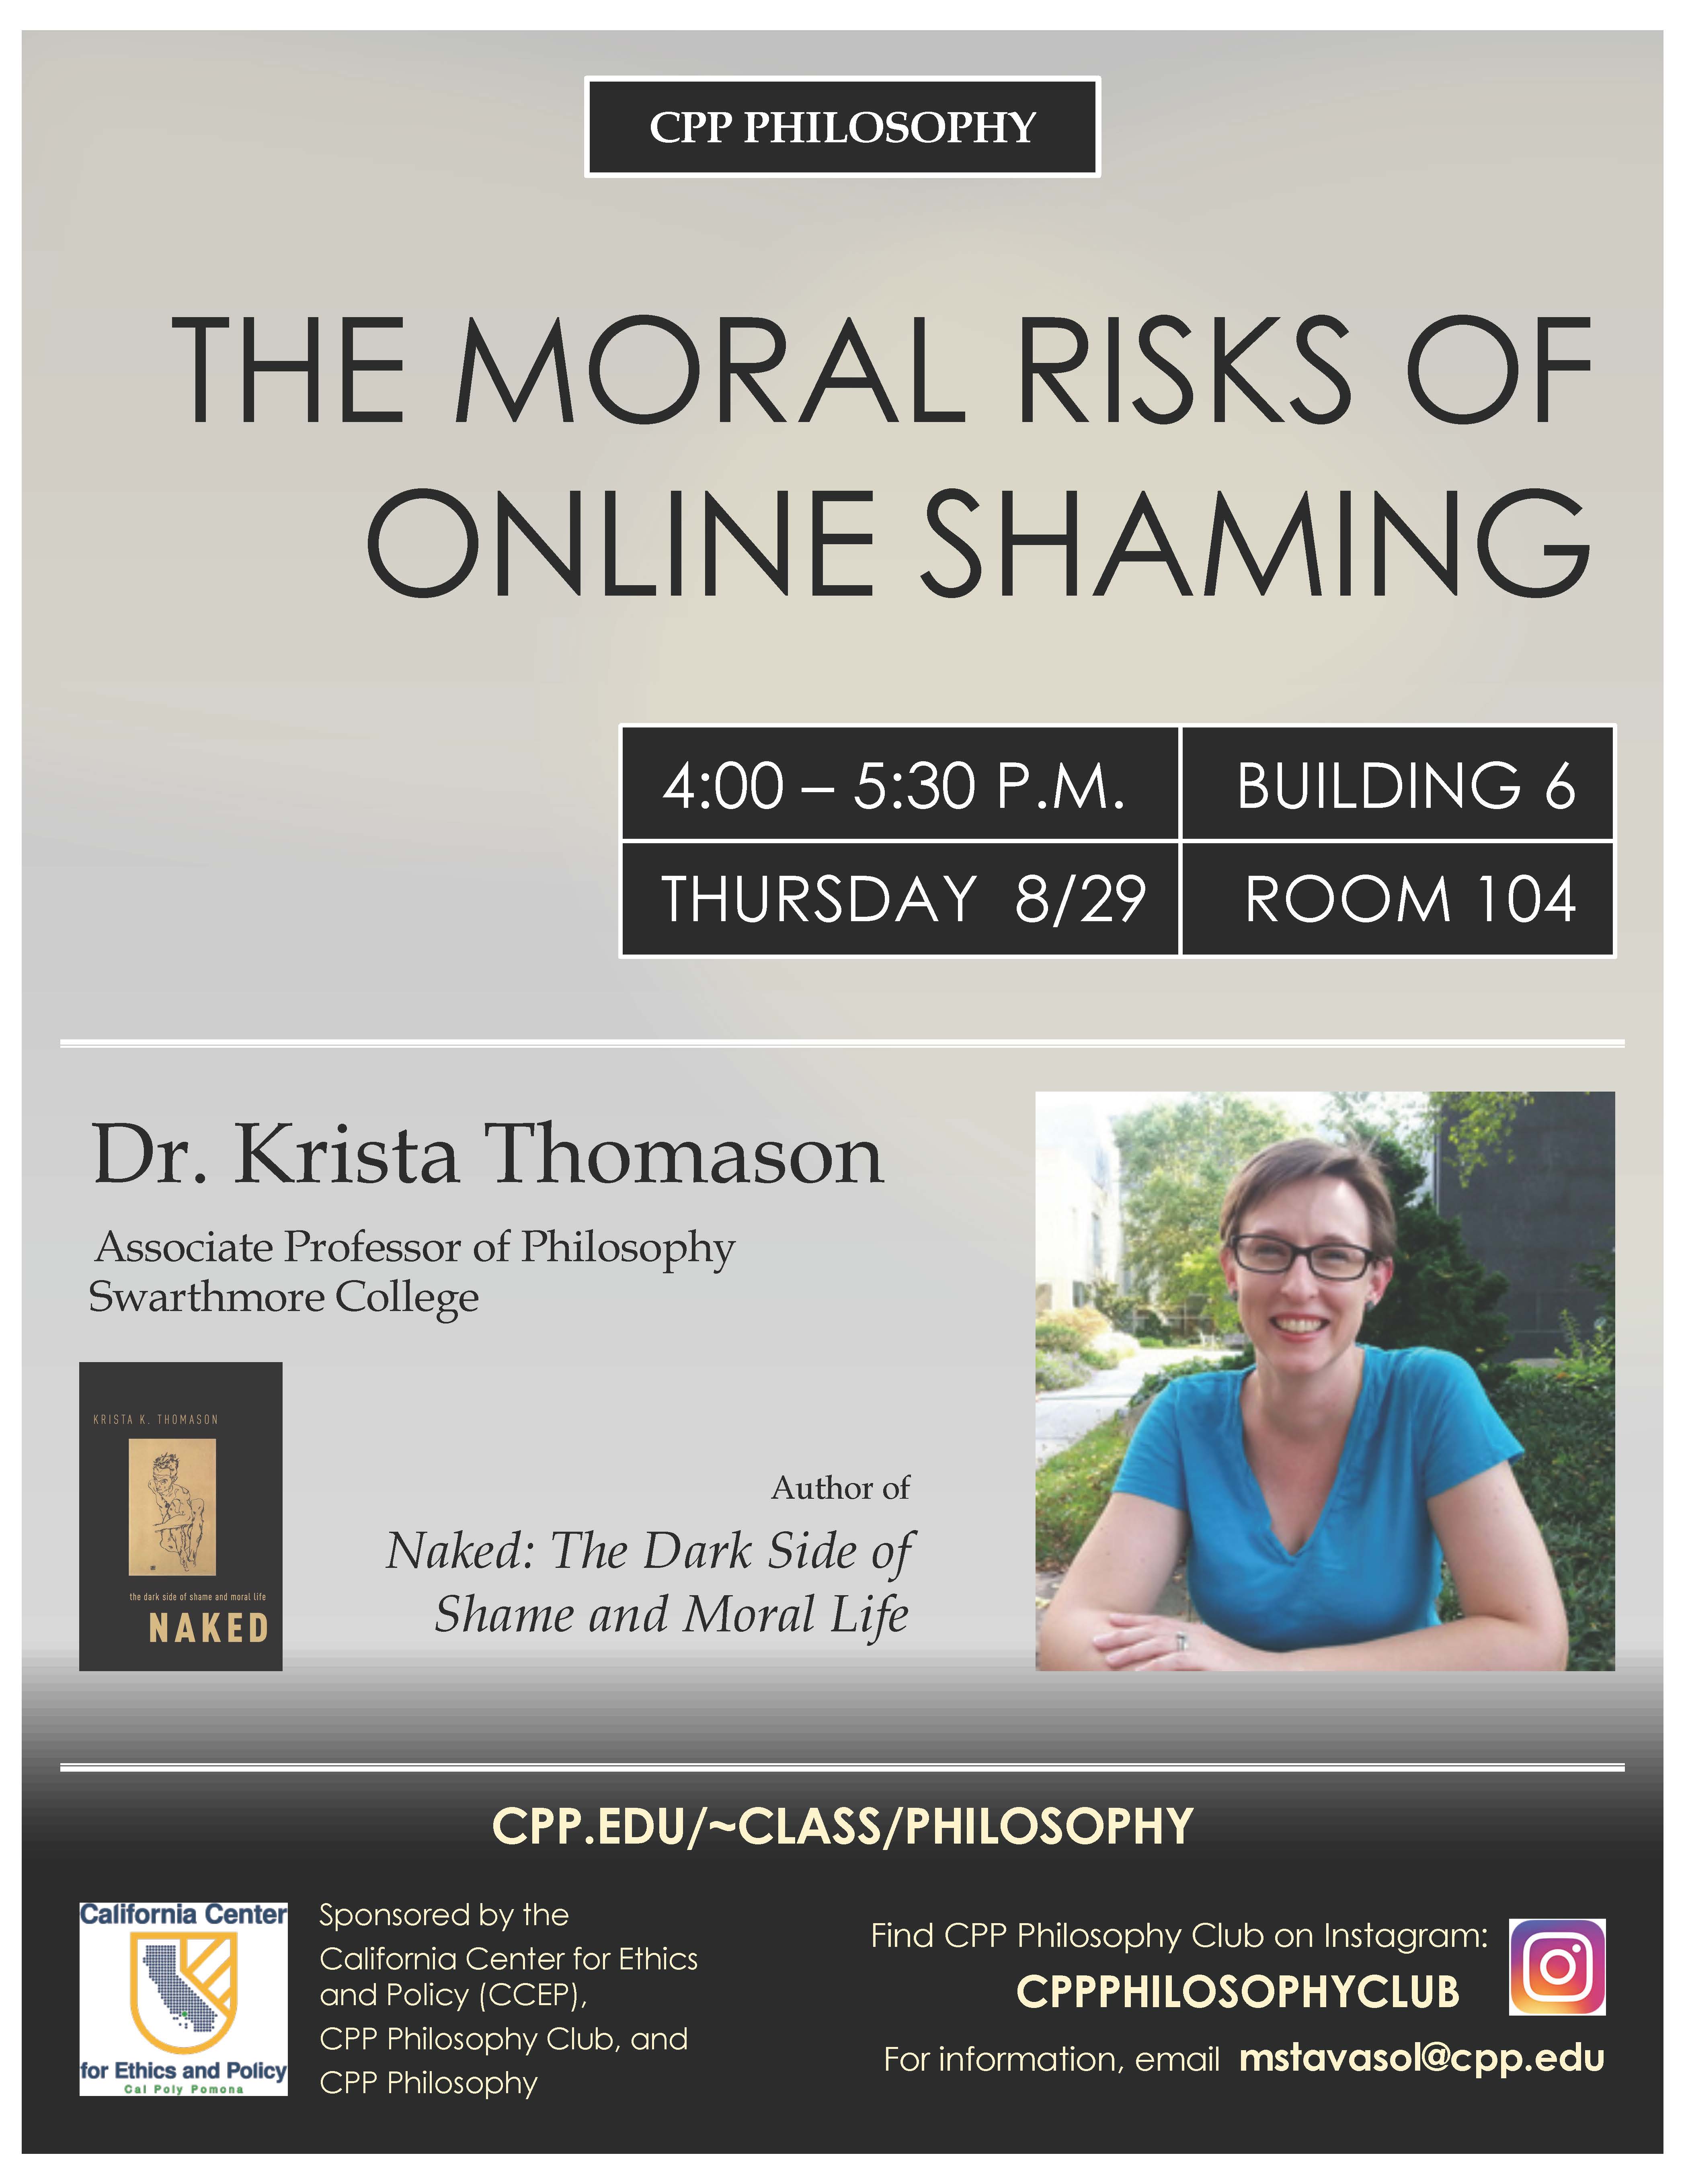 Poster for Thomason's talk, "The Moral Risks of Online Shaming," on August 29th at 4pm in Building 6, Room 104